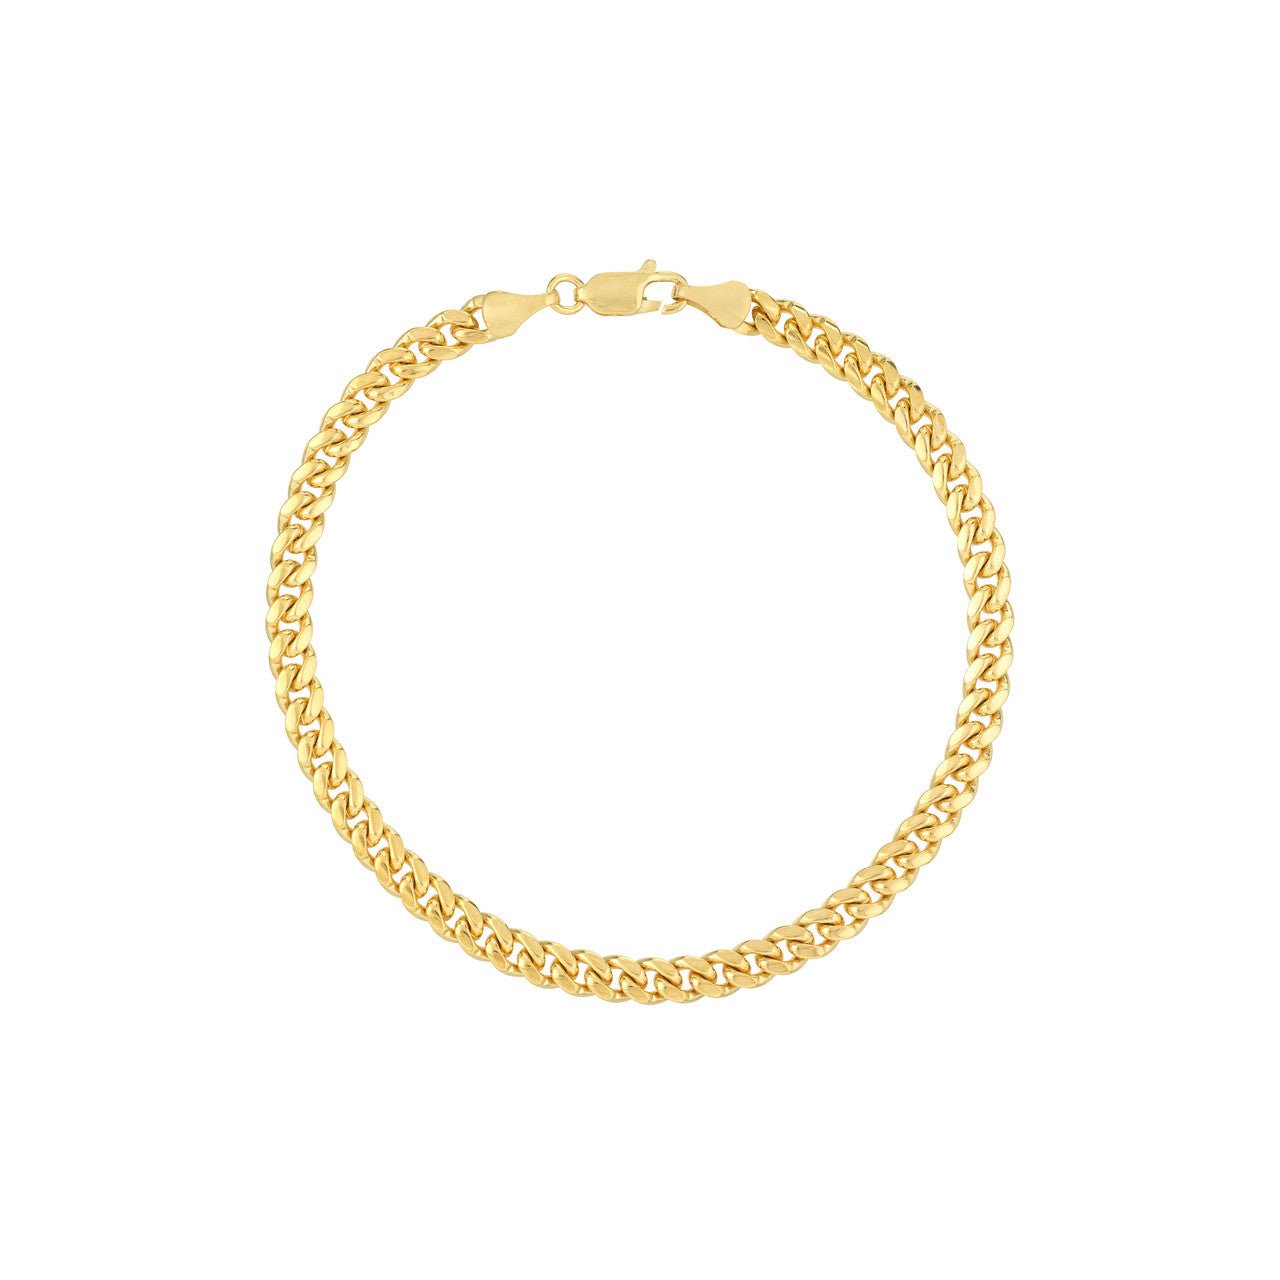 10kt yellow gold/front